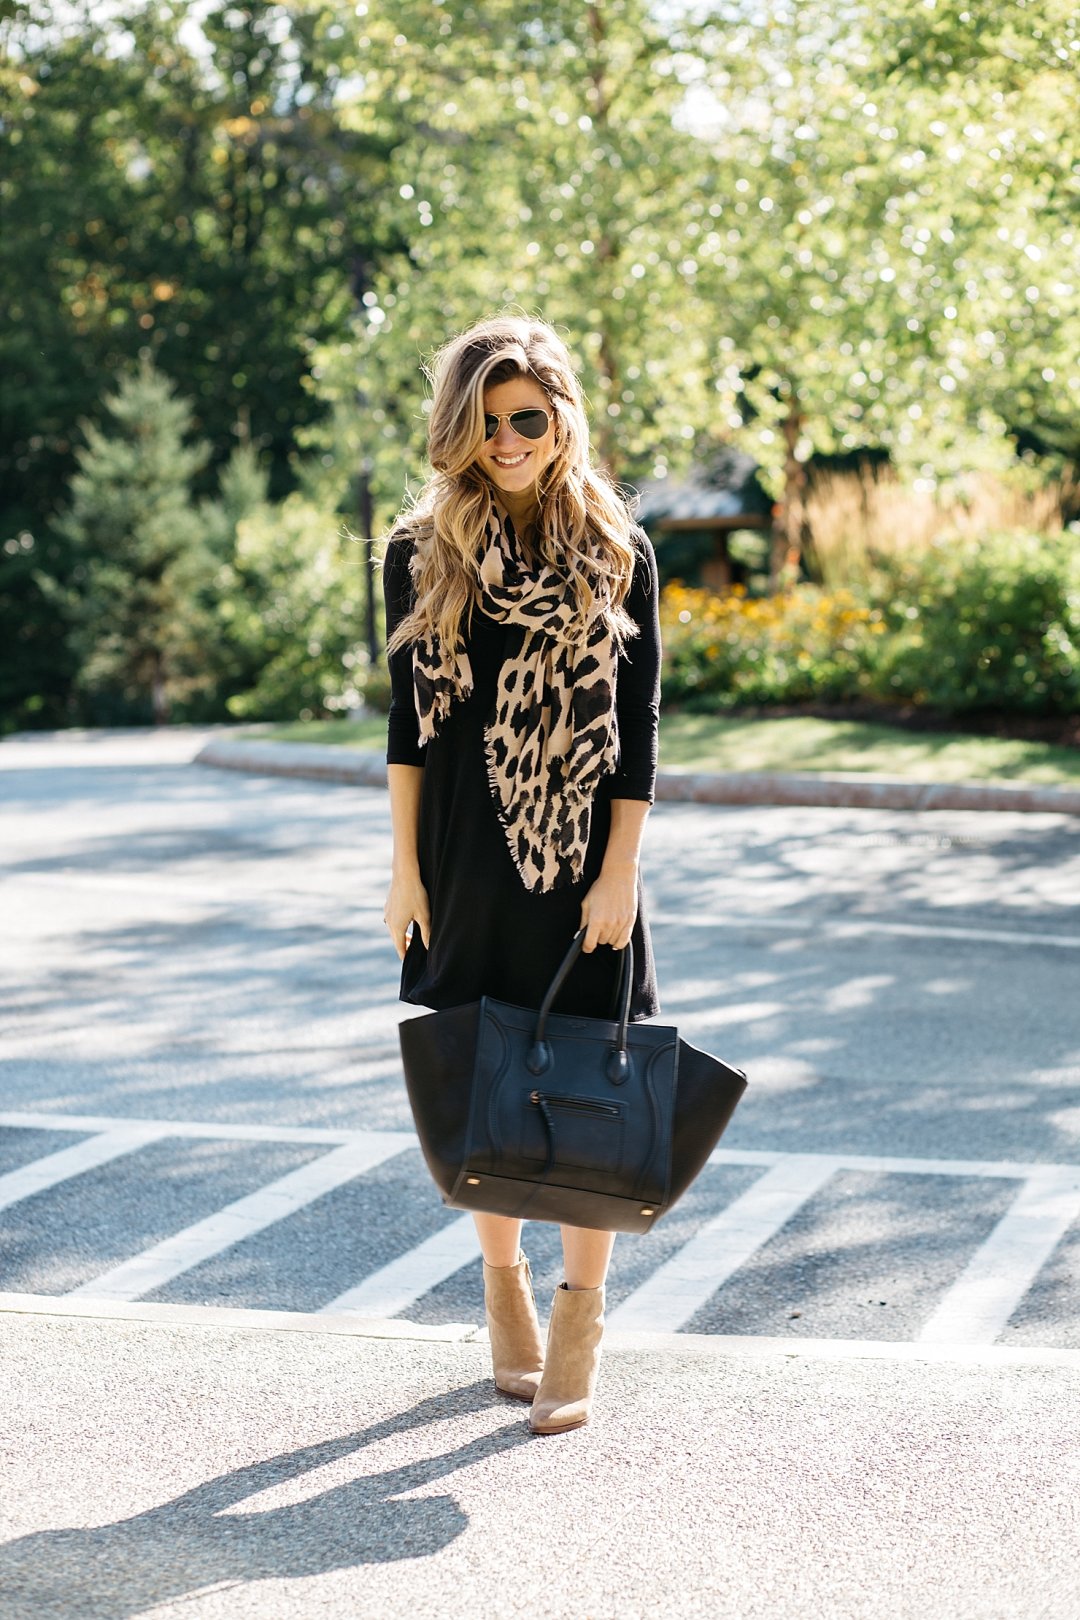 leopard print dress and boots